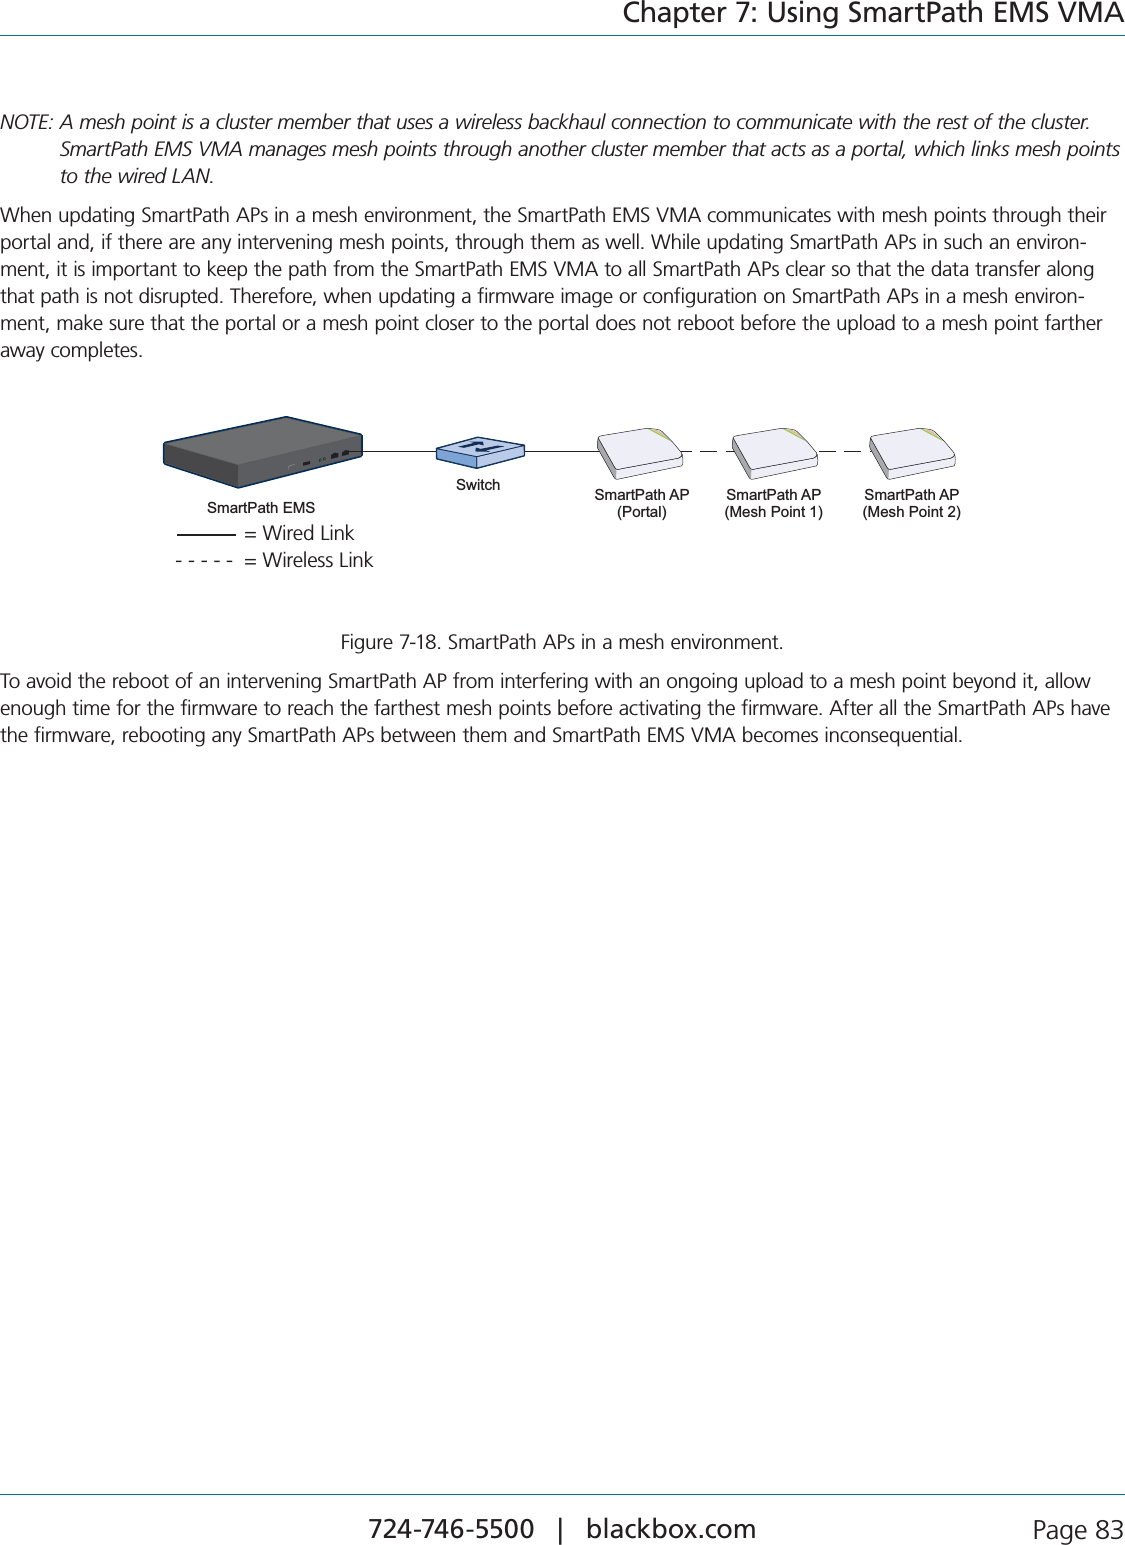 724-746-5500   |   blackbox.com  Page 83Chapter 7: Using SmartPath EMS VMANOTE:  A mesh point is a cluster member that uses a wireless backhaul connection to communicate with the rest of the cluster. SmartPath EMS VMA manages mesh points through another cluster member that acts as a portal, which links mesh points to the wired LAN.7HENUPDATING3MART0ATH!0SINAMESHENVIRONMENTTHE3MART0ATH%-36-!COMMUNICATESWITHMESHPOINTSTHROUGHTHEIRportal and, if there are any intervening mesh points, through them as well. While updating SmartPath APs in such an environ-MENTITISIMPORTANTTOKEEPTHEPATHFROMTHE3MART0ATH%-36-!TOALL3MART0ATH!0SCLEARSOTHATTHEDATATRANSFERALONGthat path is not disrupted. Therefore, when updating a firmware image or configuration on SmartPath APs in a mesh environ-ment, make sure that the portal or a mesh point closer to the portal does not reboot before the upload to a mesh point farther away completes.Switch SmartPath AP(Portal)SmartPath AP(Mesh Point 1)SmartPath AP(Mesh Point 2)SmartPath EMS  = Wired Link  - - - - -  = Wireless LinkFigure 7-18. SmartPath APs in a mesh environment.To avoid the reboot of an intervening SmartPath AP from interfering with an ongoing upload to a mesh point beyond it, allow enough time for the firmware to reach the farthest mesh points before activating the firmware. After all the SmartPath APs have THEFIRMWAREREBOOTINGANY3MART0ATH!0SBETWEENTHEMAND3MART0ATH%-36-!BECOMESINCONSEQUENTIAL